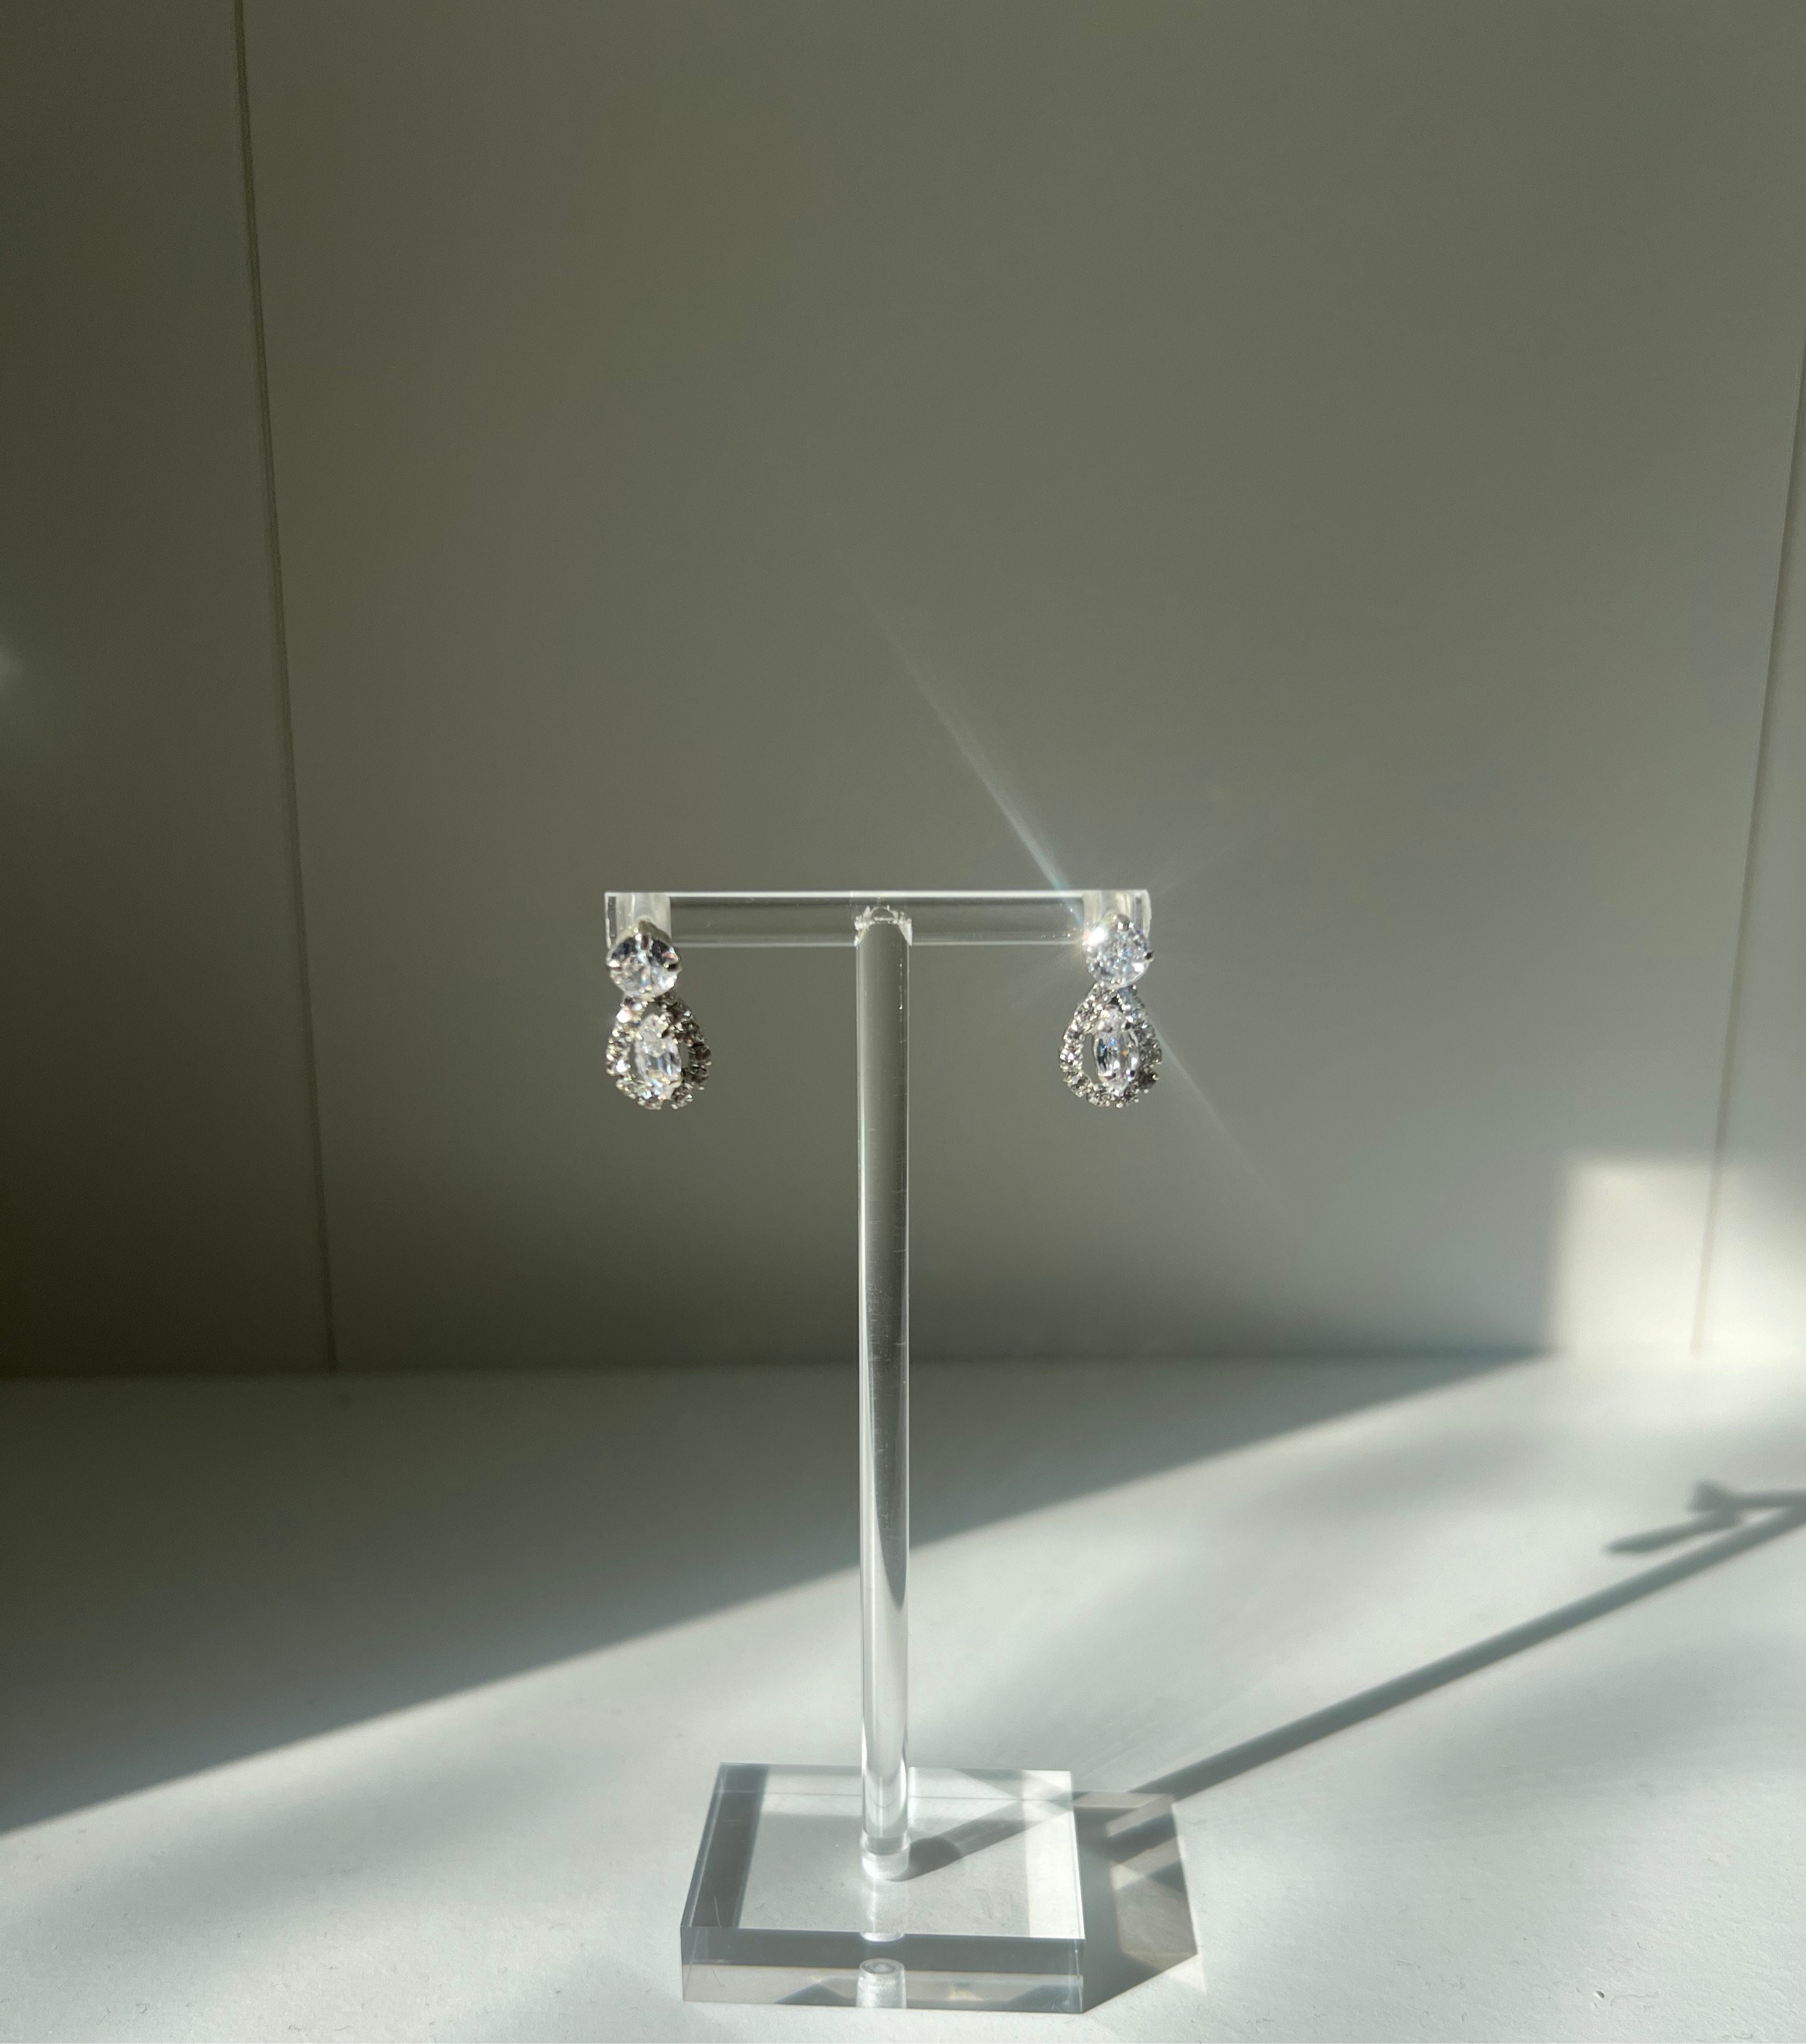 Shiny Imogen diamond earrings displayed on a clear stand